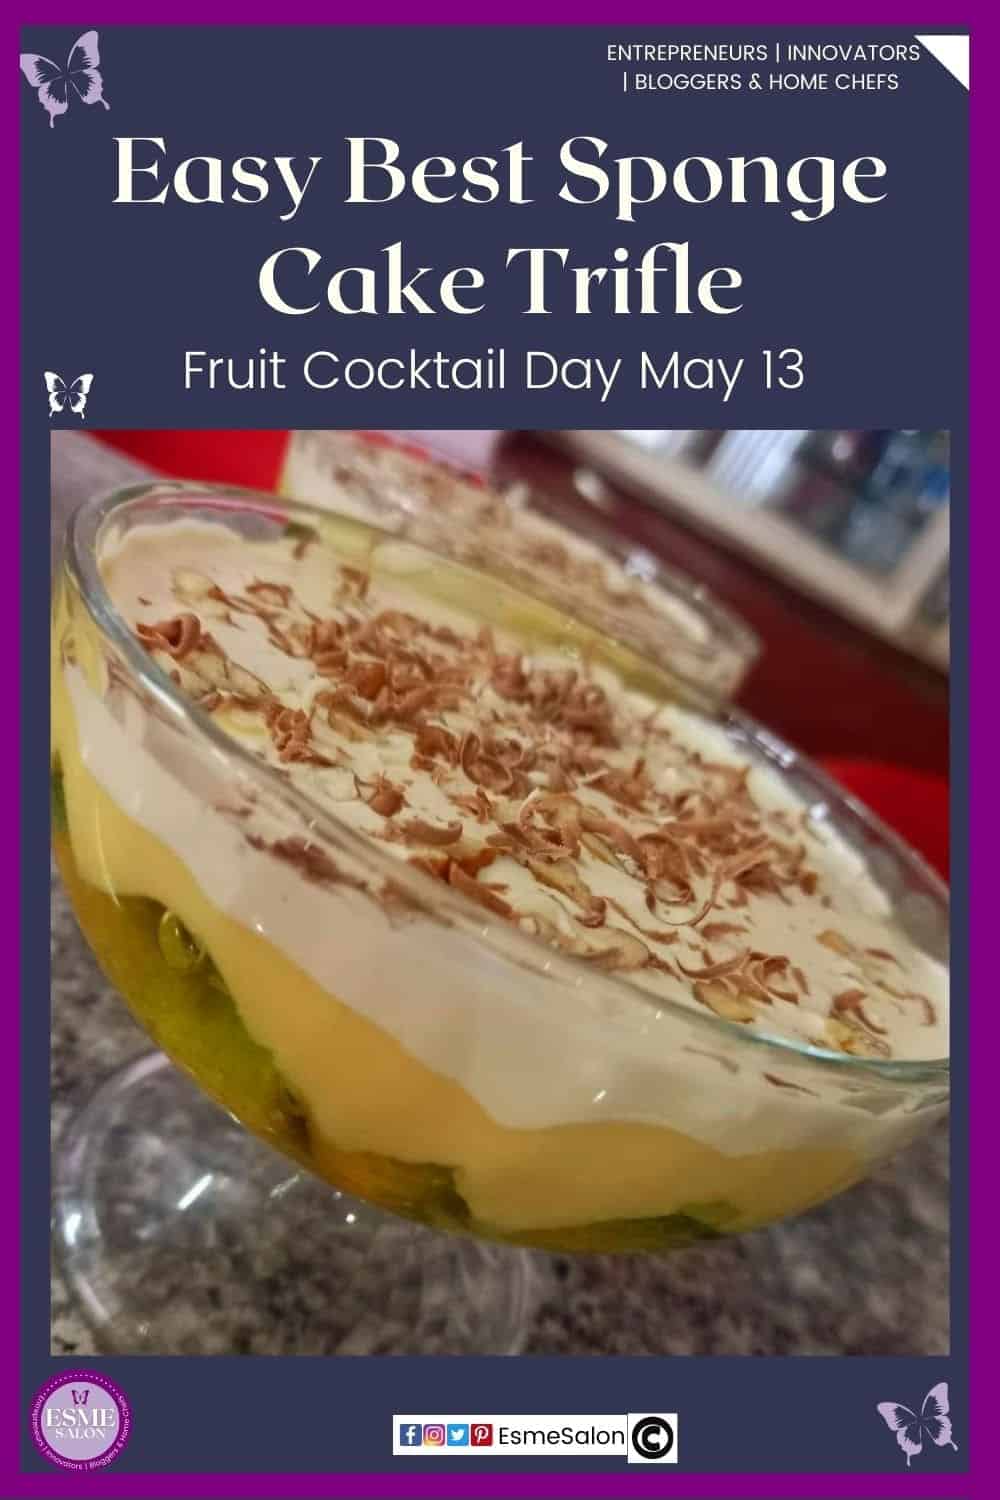 an image of a sponge cake used to make a cake trifle with custard, fruit cocktail and lots of nut in a deep round glass bowl